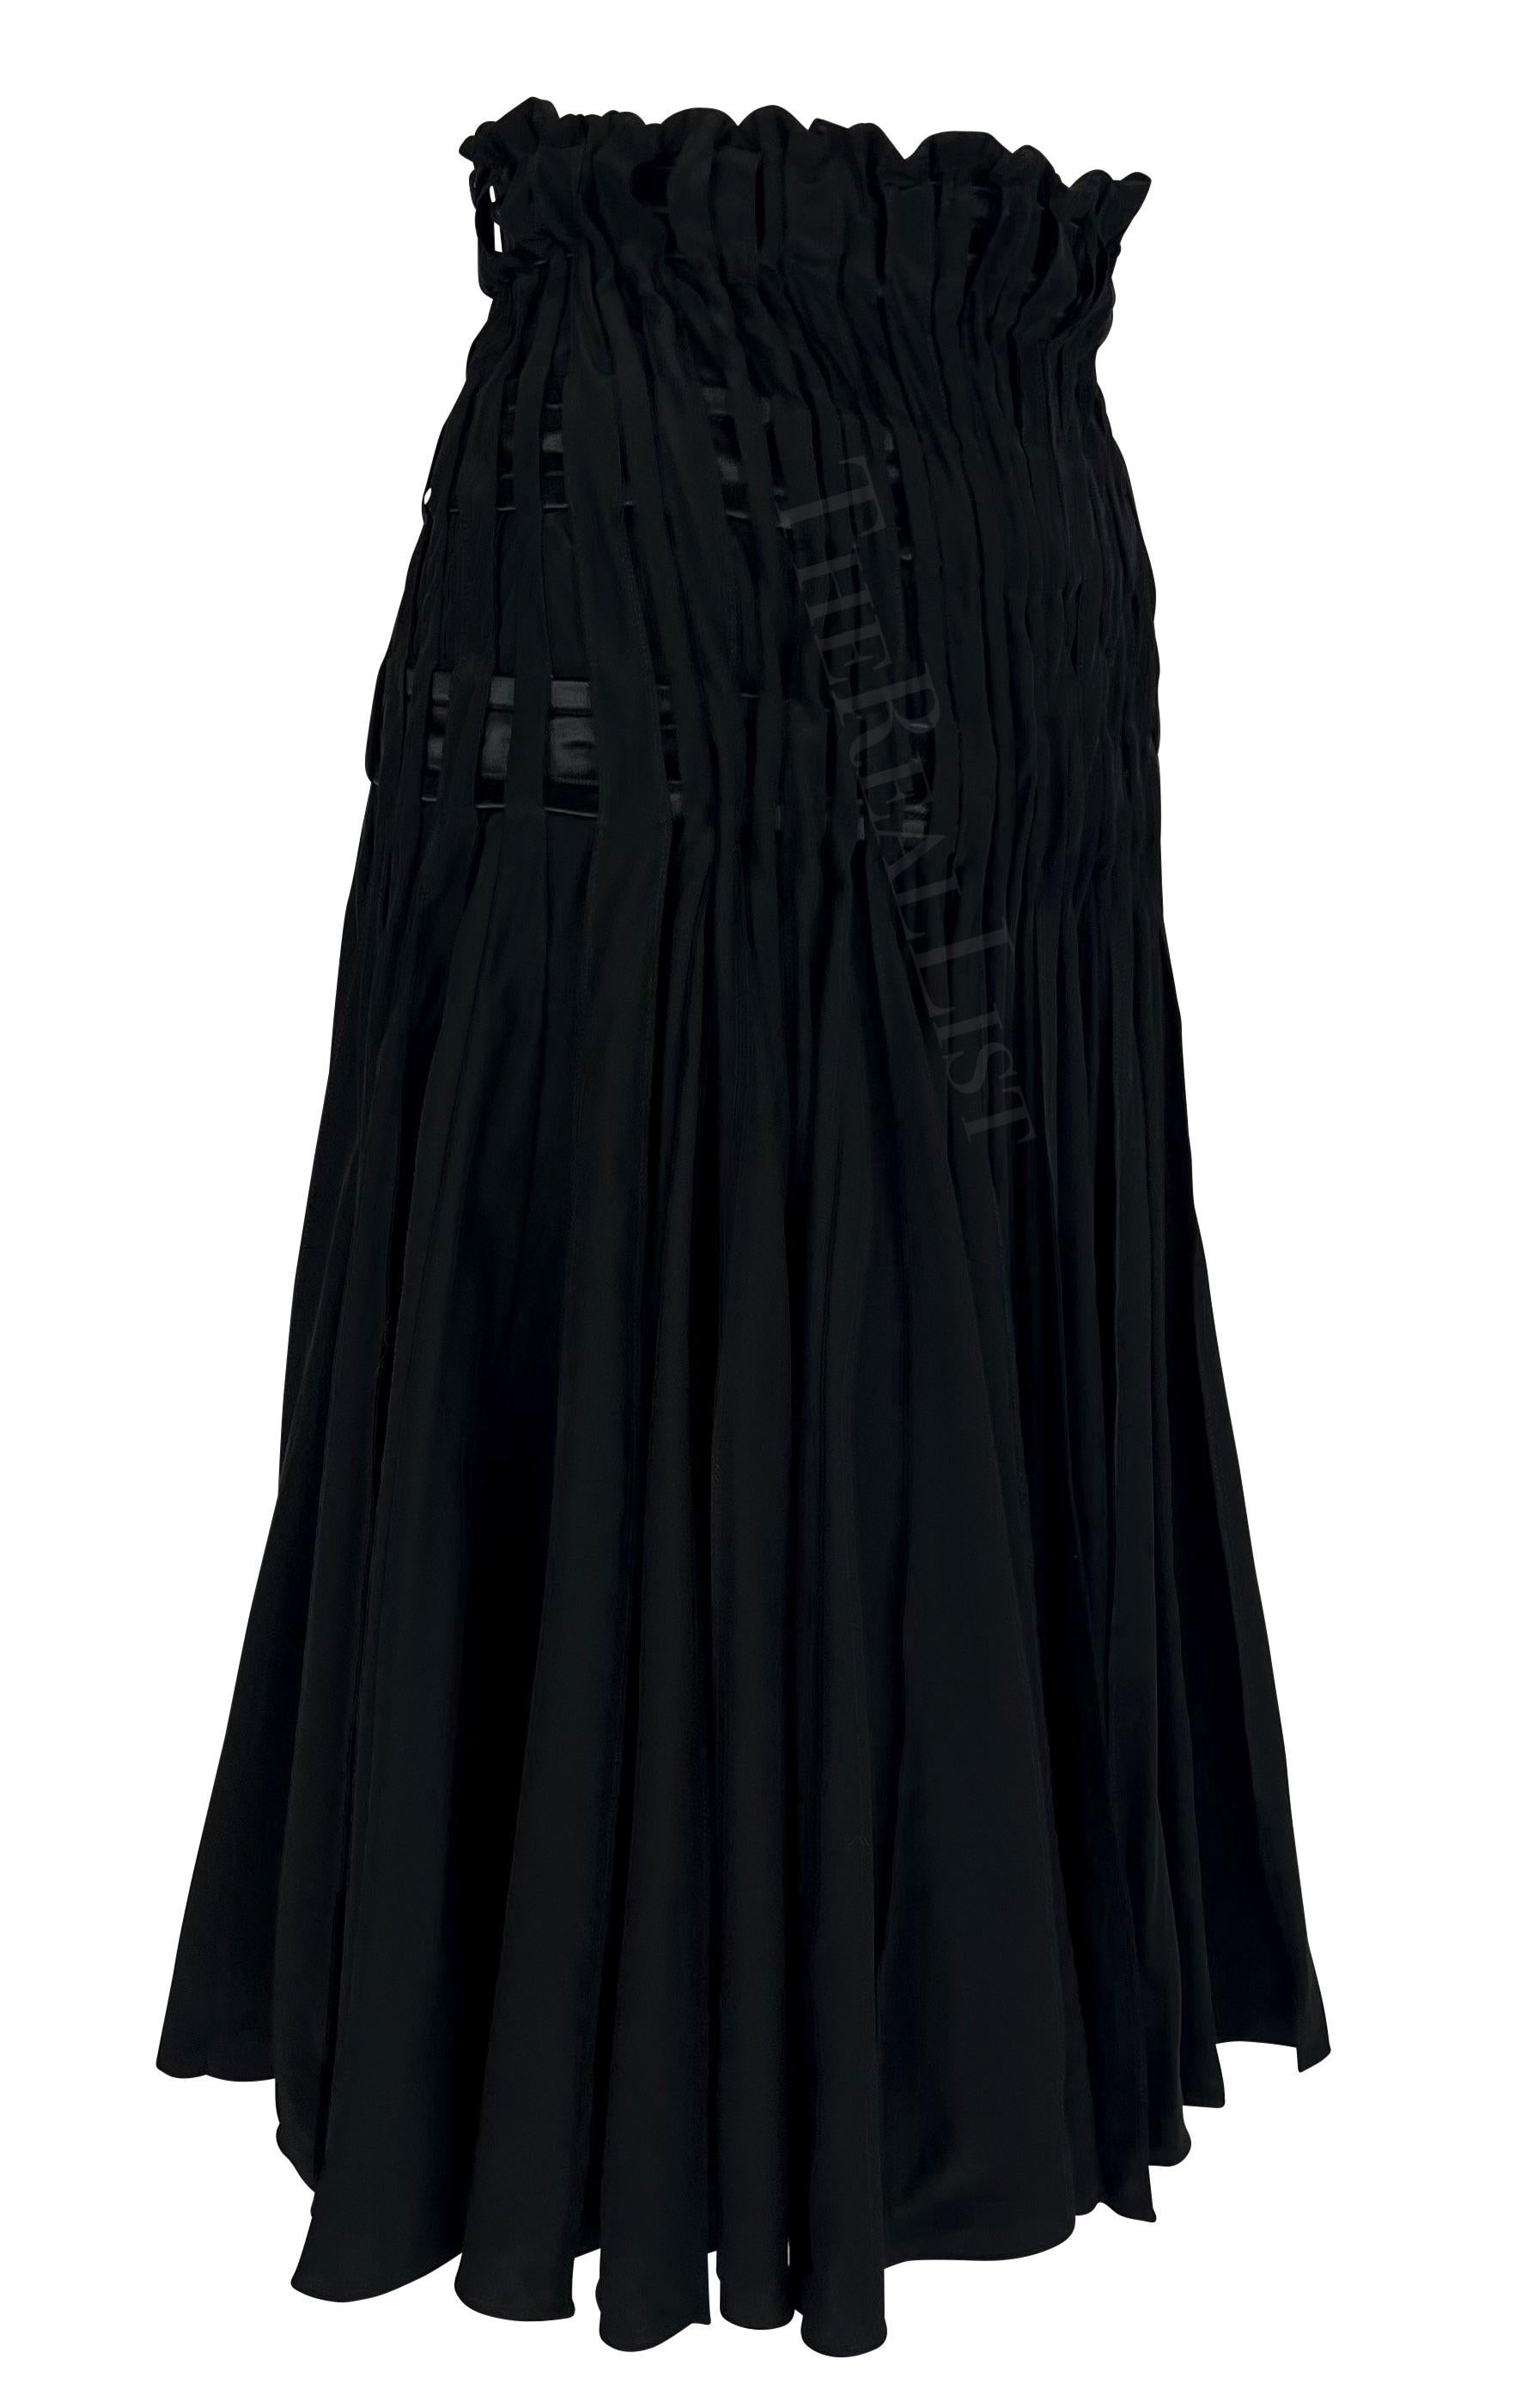 F/W 2001 Yves Saint Laurent by Tom Ford Pleated Black Satin Flare Skirt For Sale 2